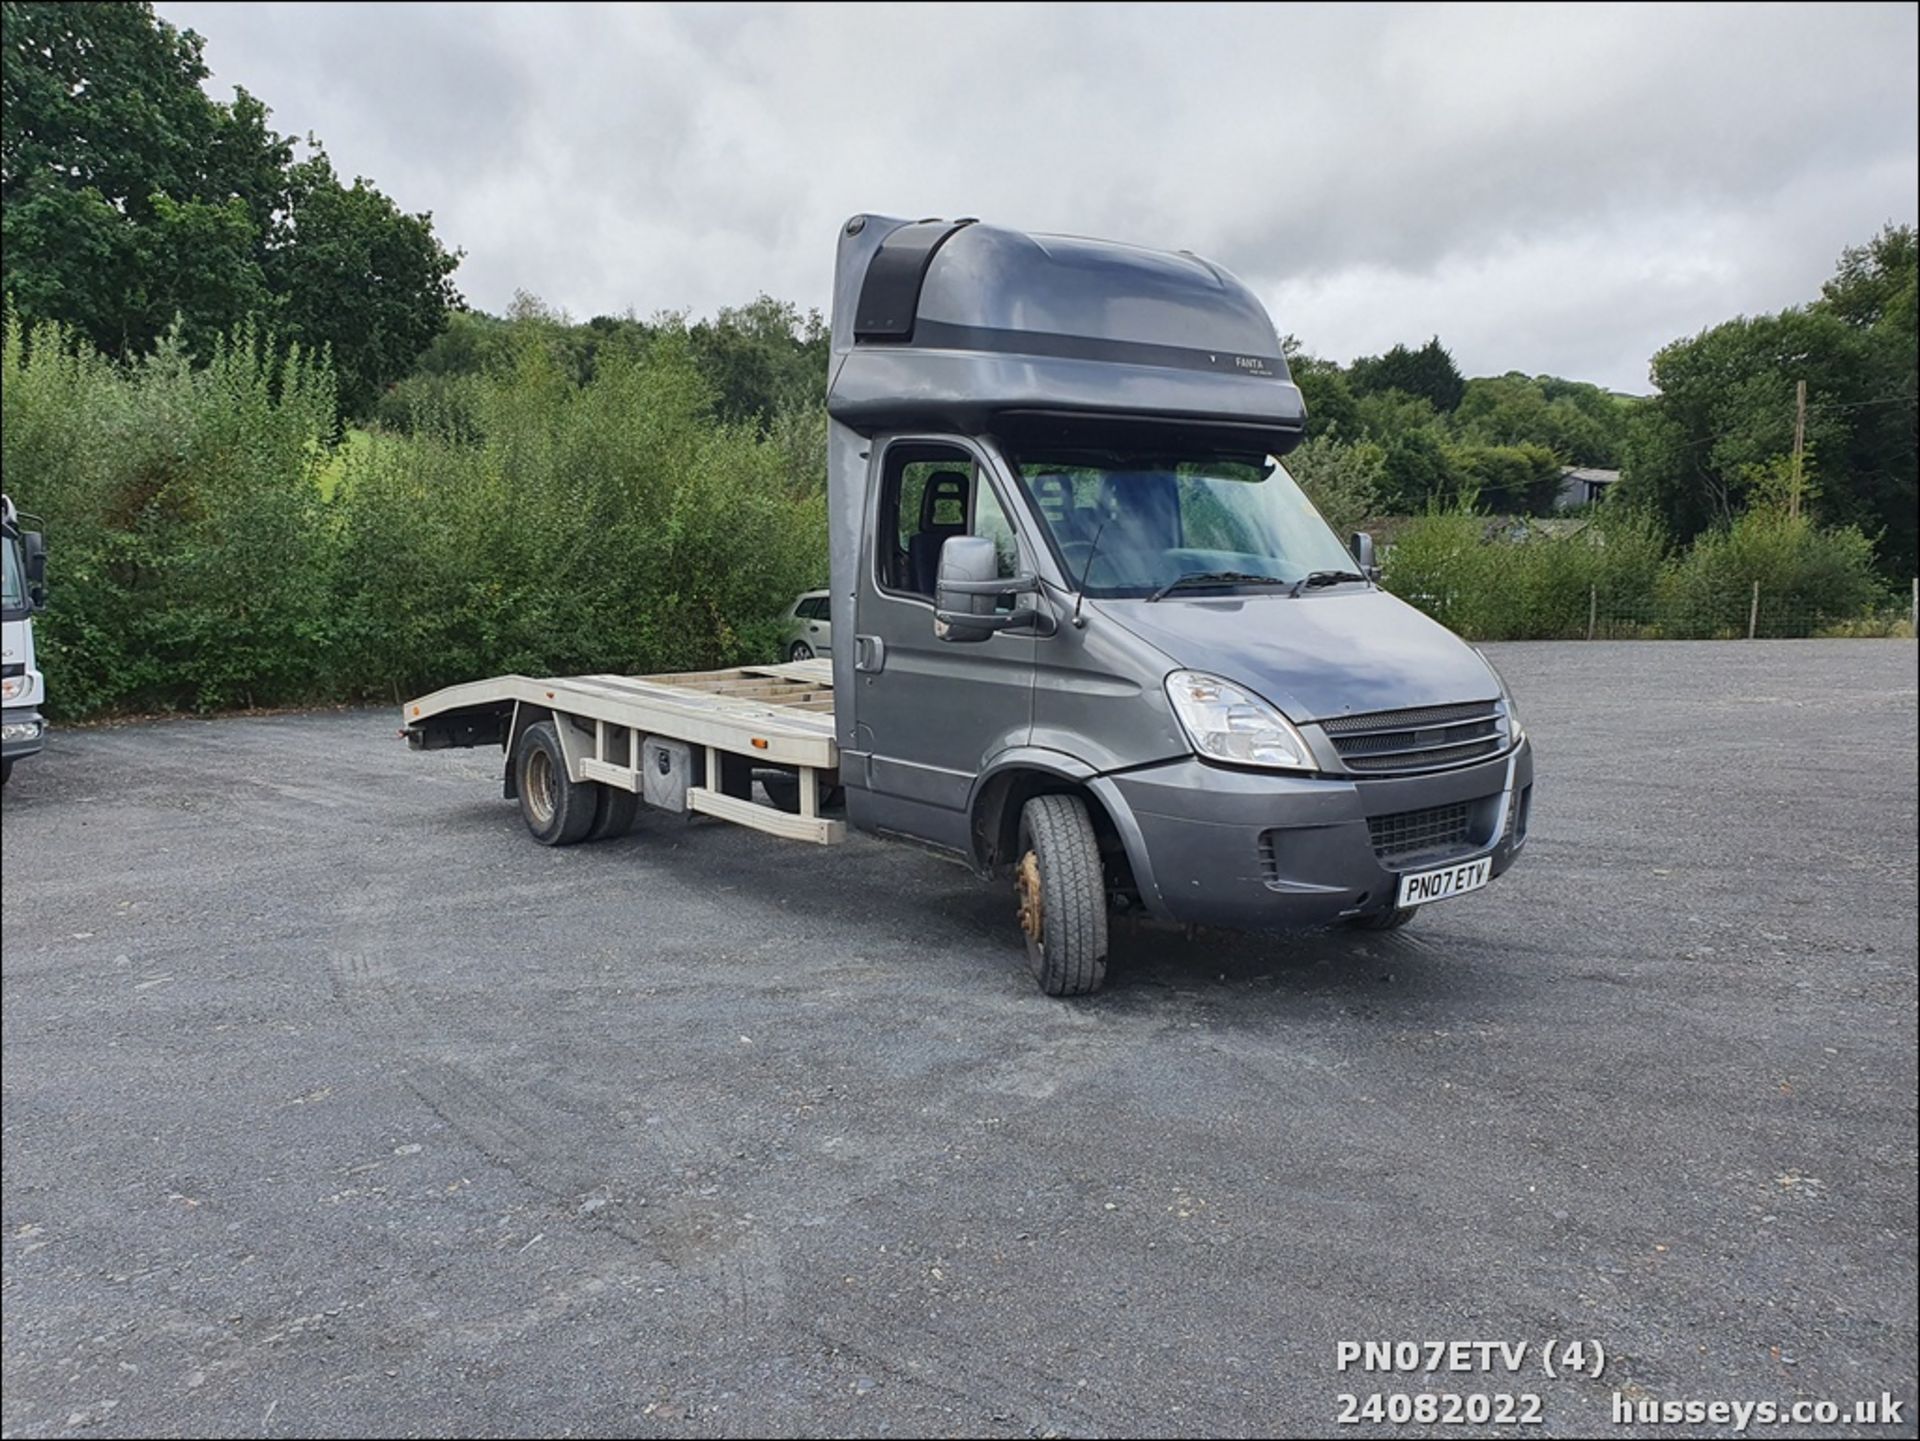 07/07 IVECO DAILY 65C18 - 2998cc VEHICLE TRANSPORTER 2dr (Grey) - Image 3 of 66